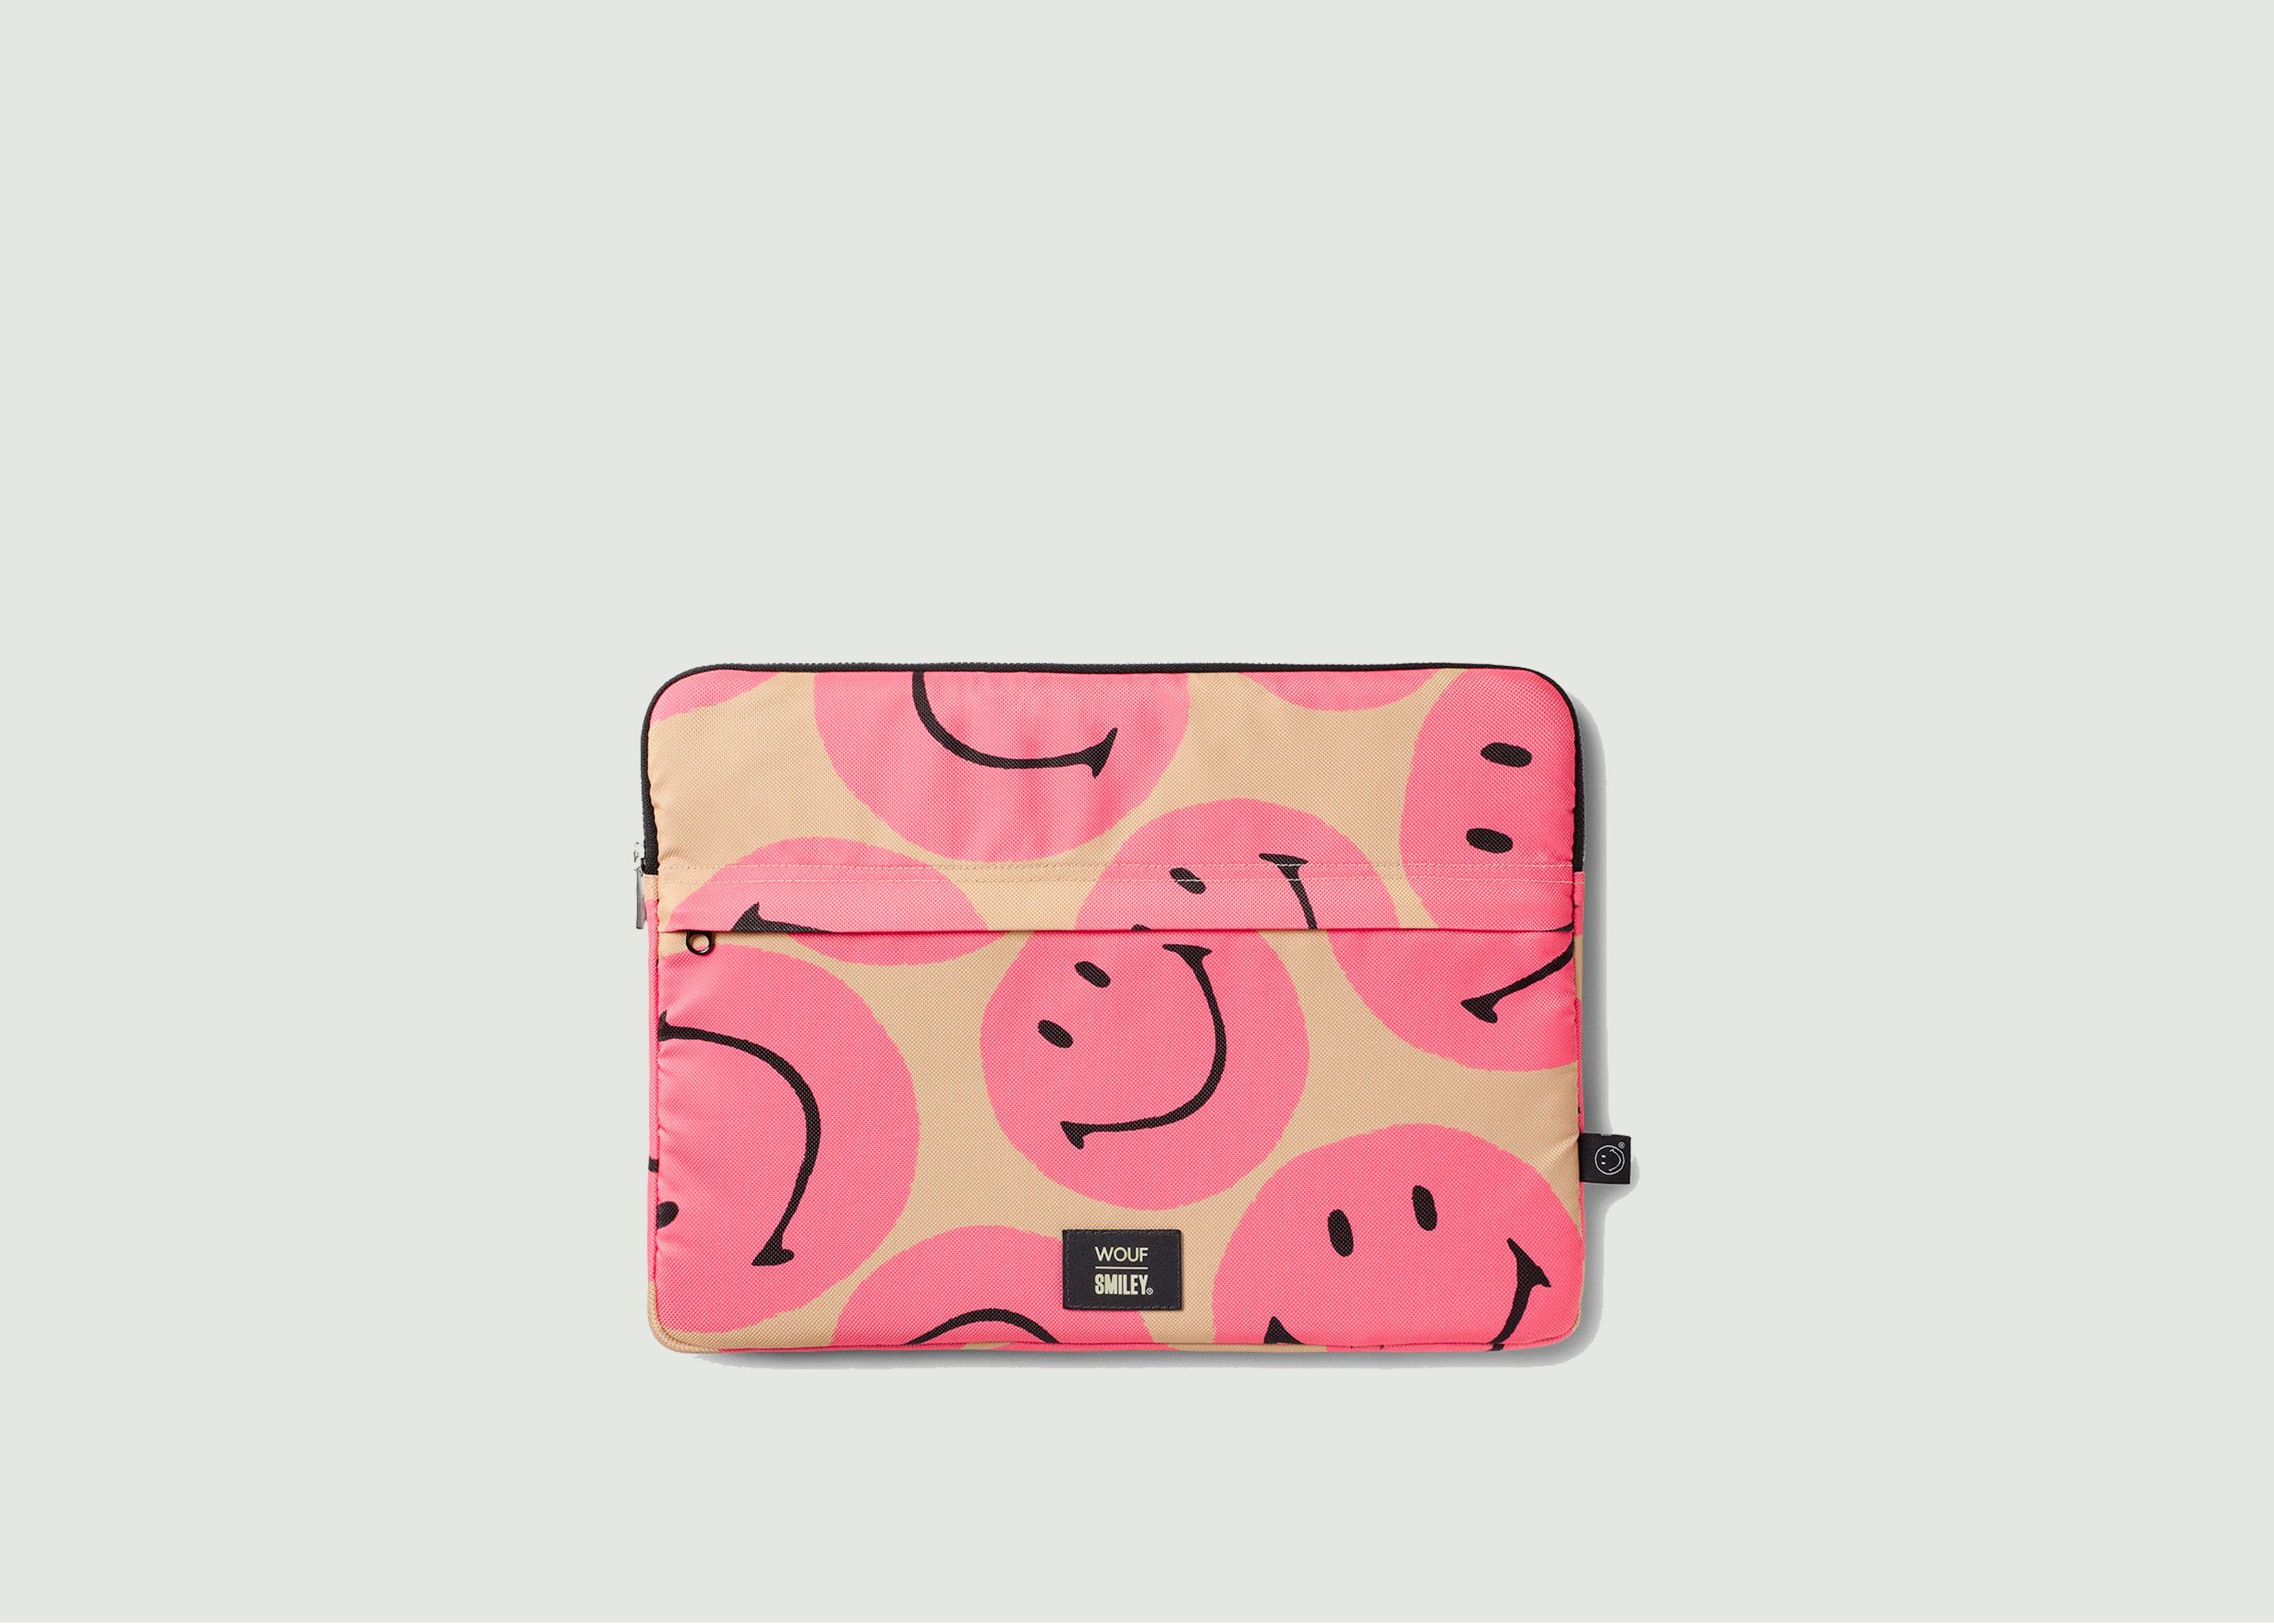 Smiley® Pink Laptop Sleeve 13 - Wouf